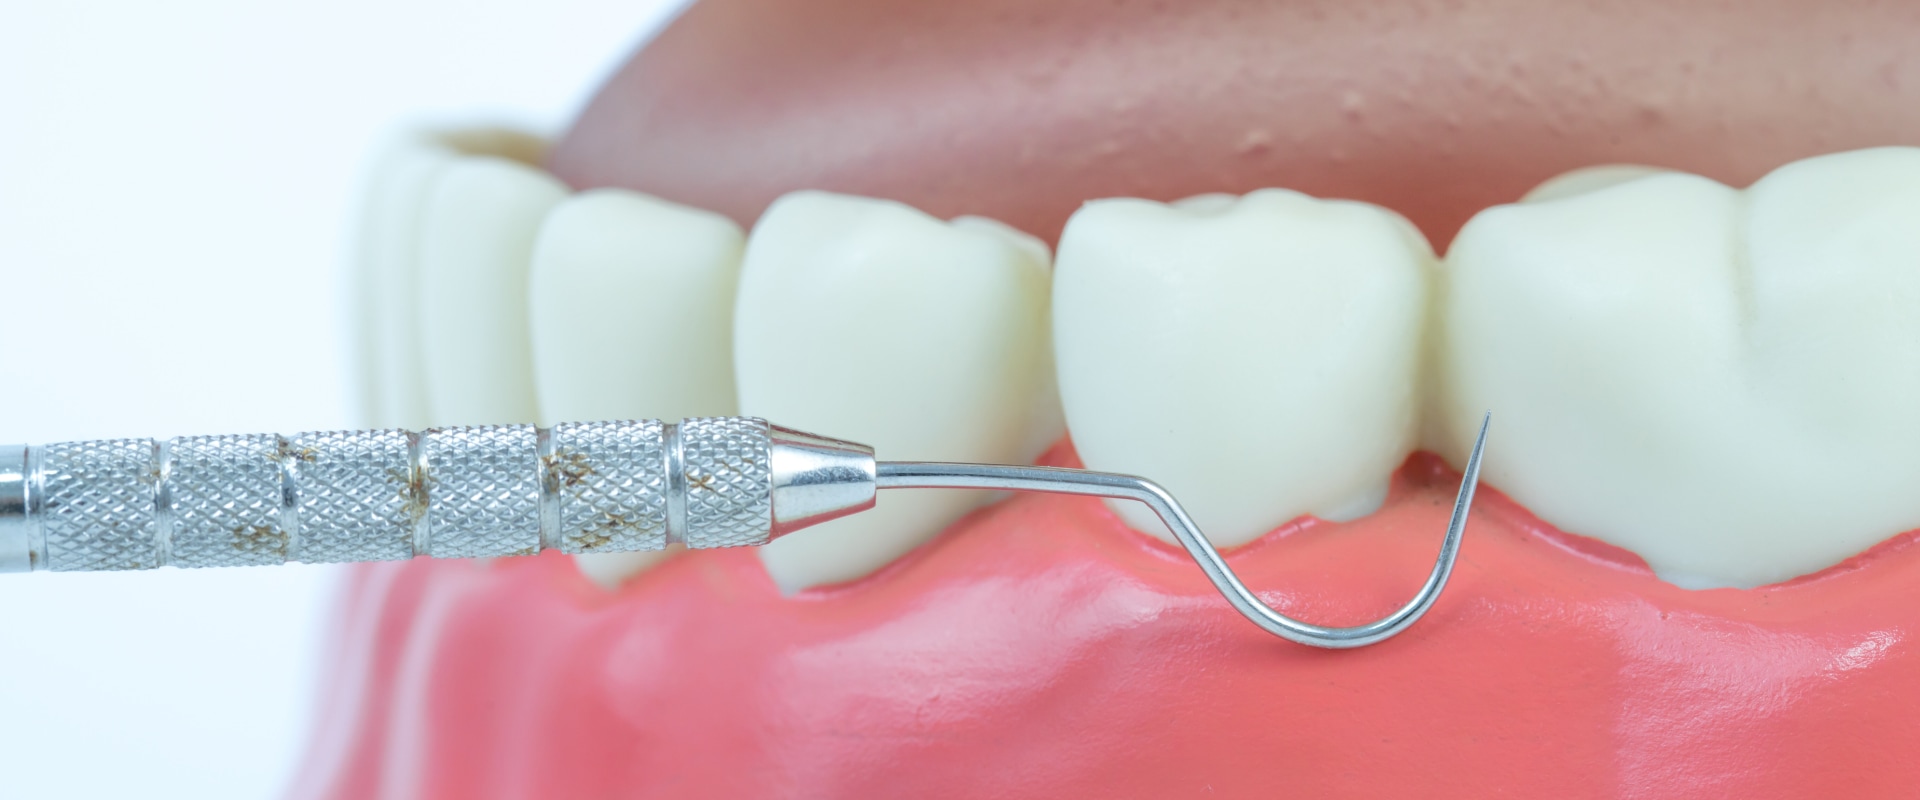 The Benefits and Risks of Using Ultrasonic Dental Scalers in Dentistry